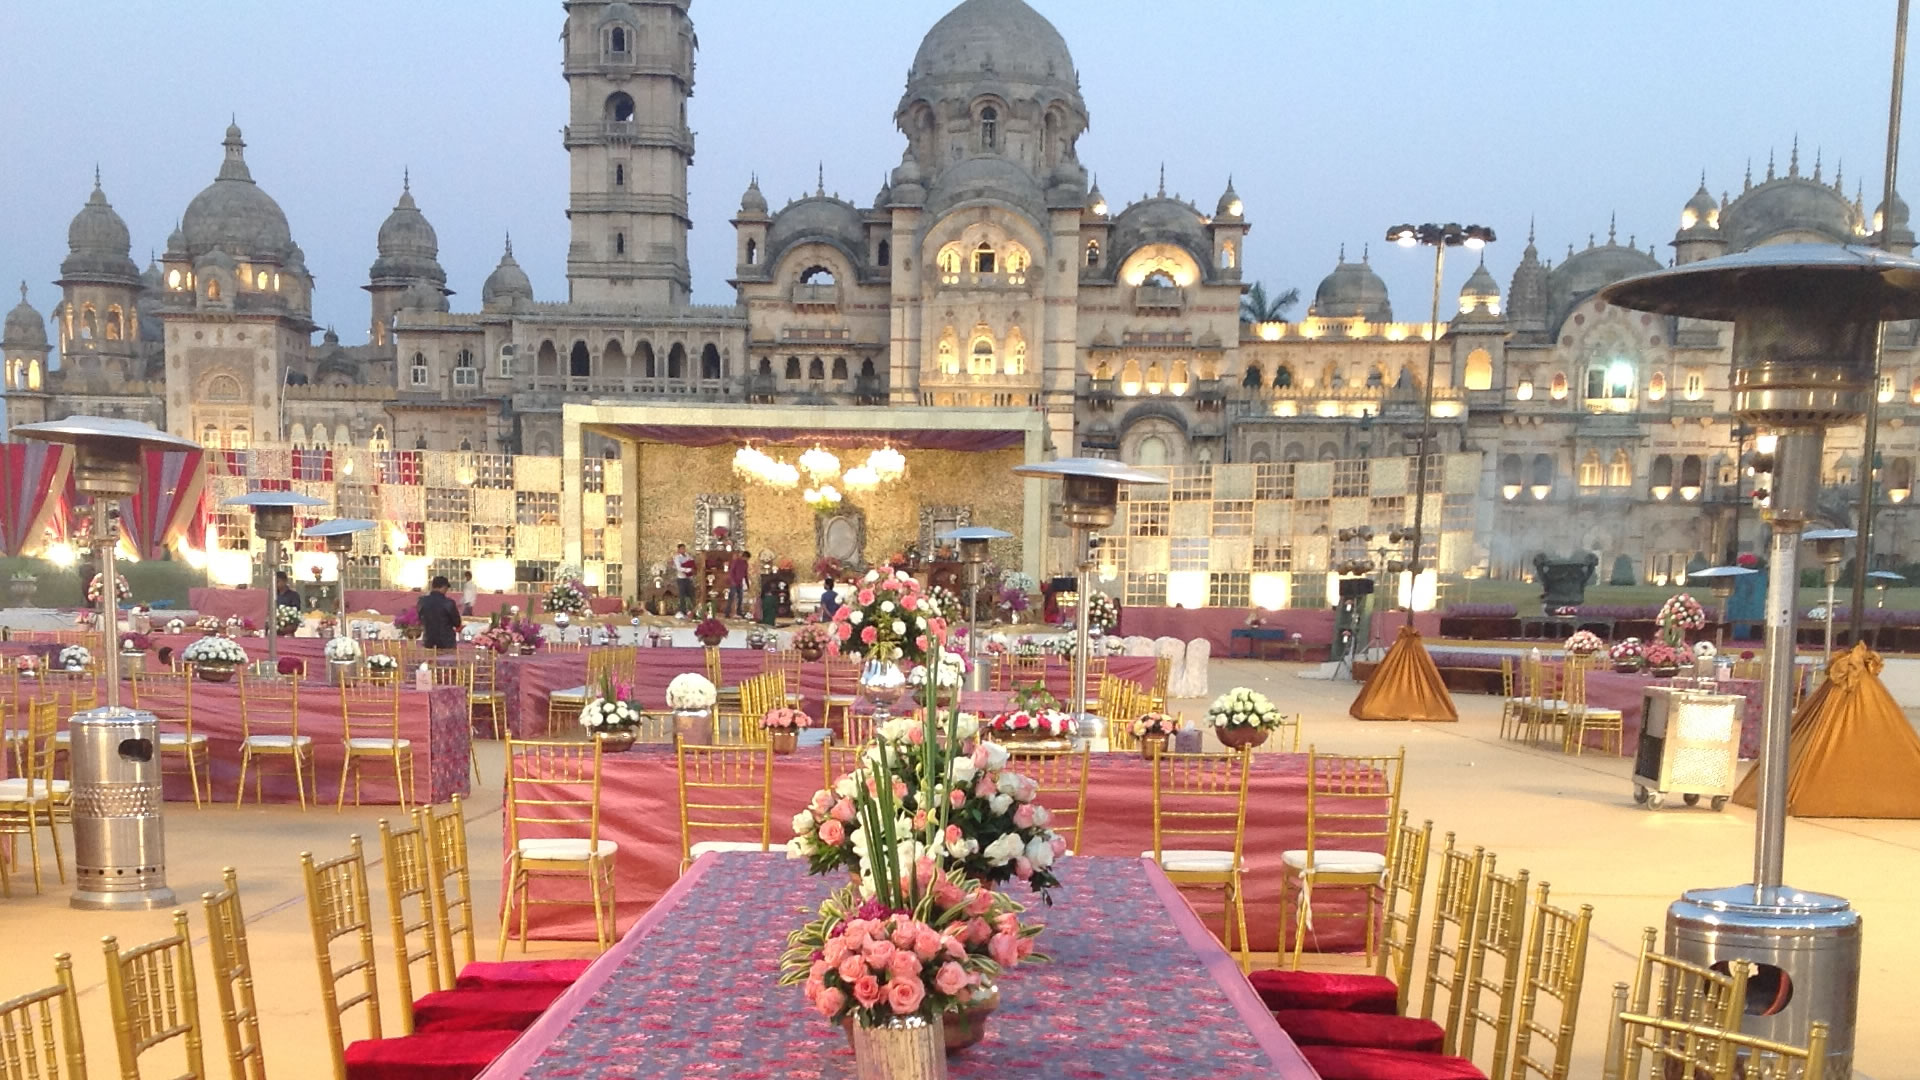 A truly magnificent setting for your special event